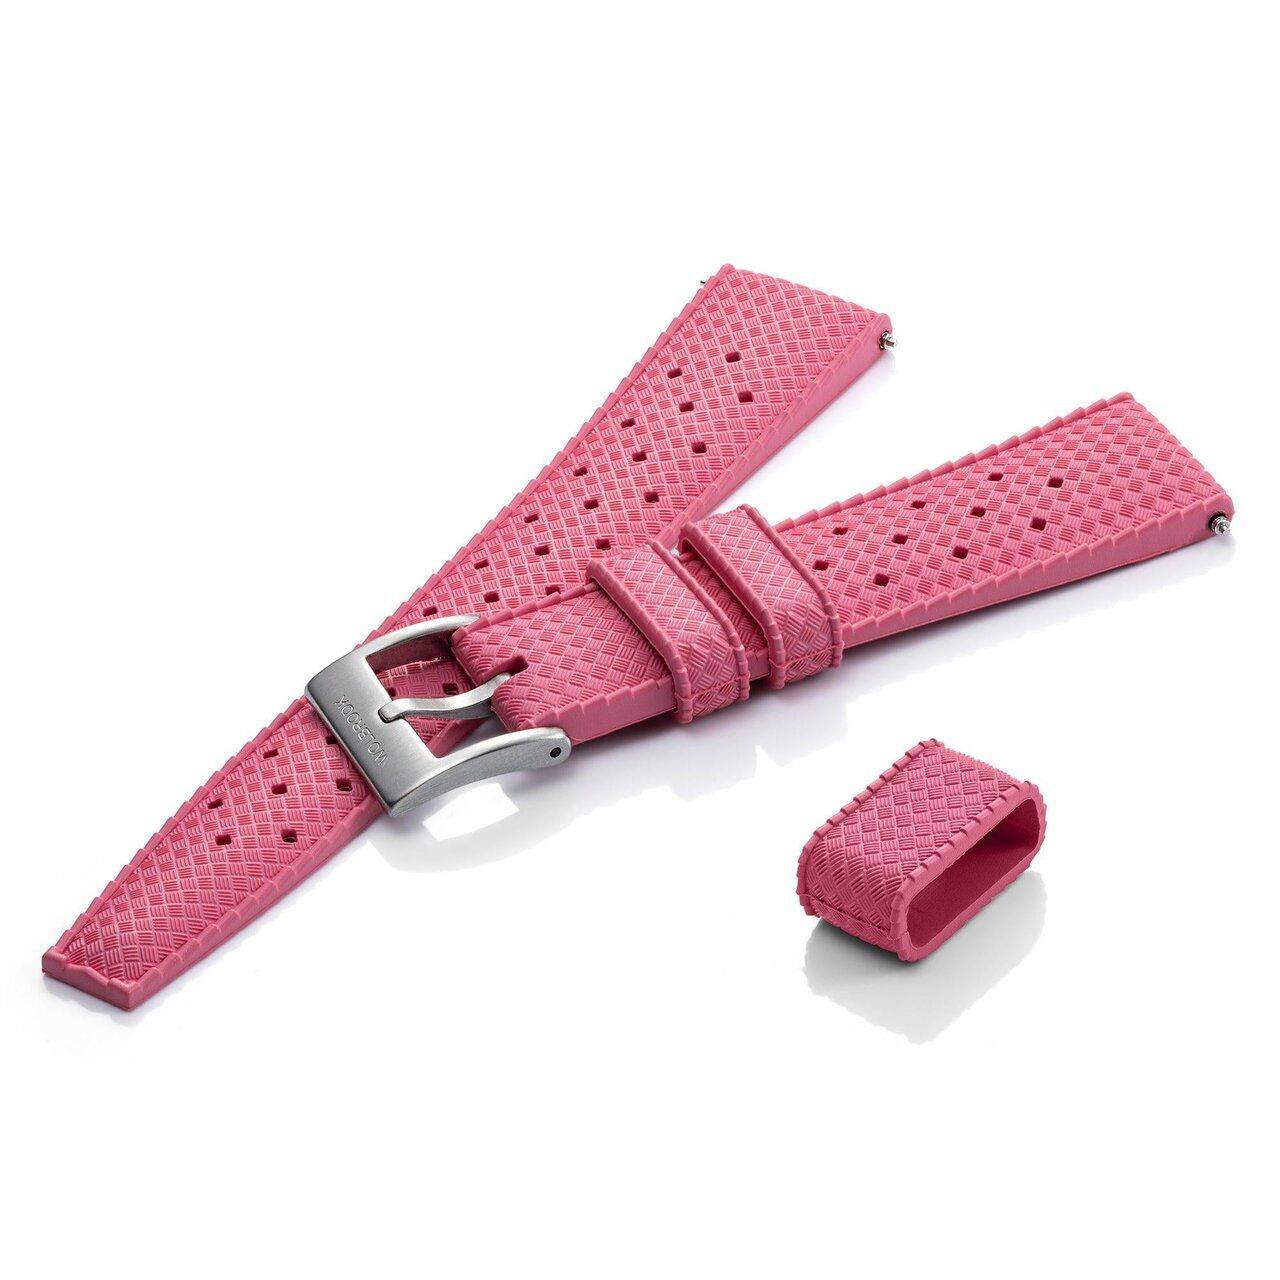 Pink_Tropic_Rubber_Strap_20mm_Steel_Buckle_Side_View_8a2f7813-8036-4734-9ce5-abd294011229.jpg